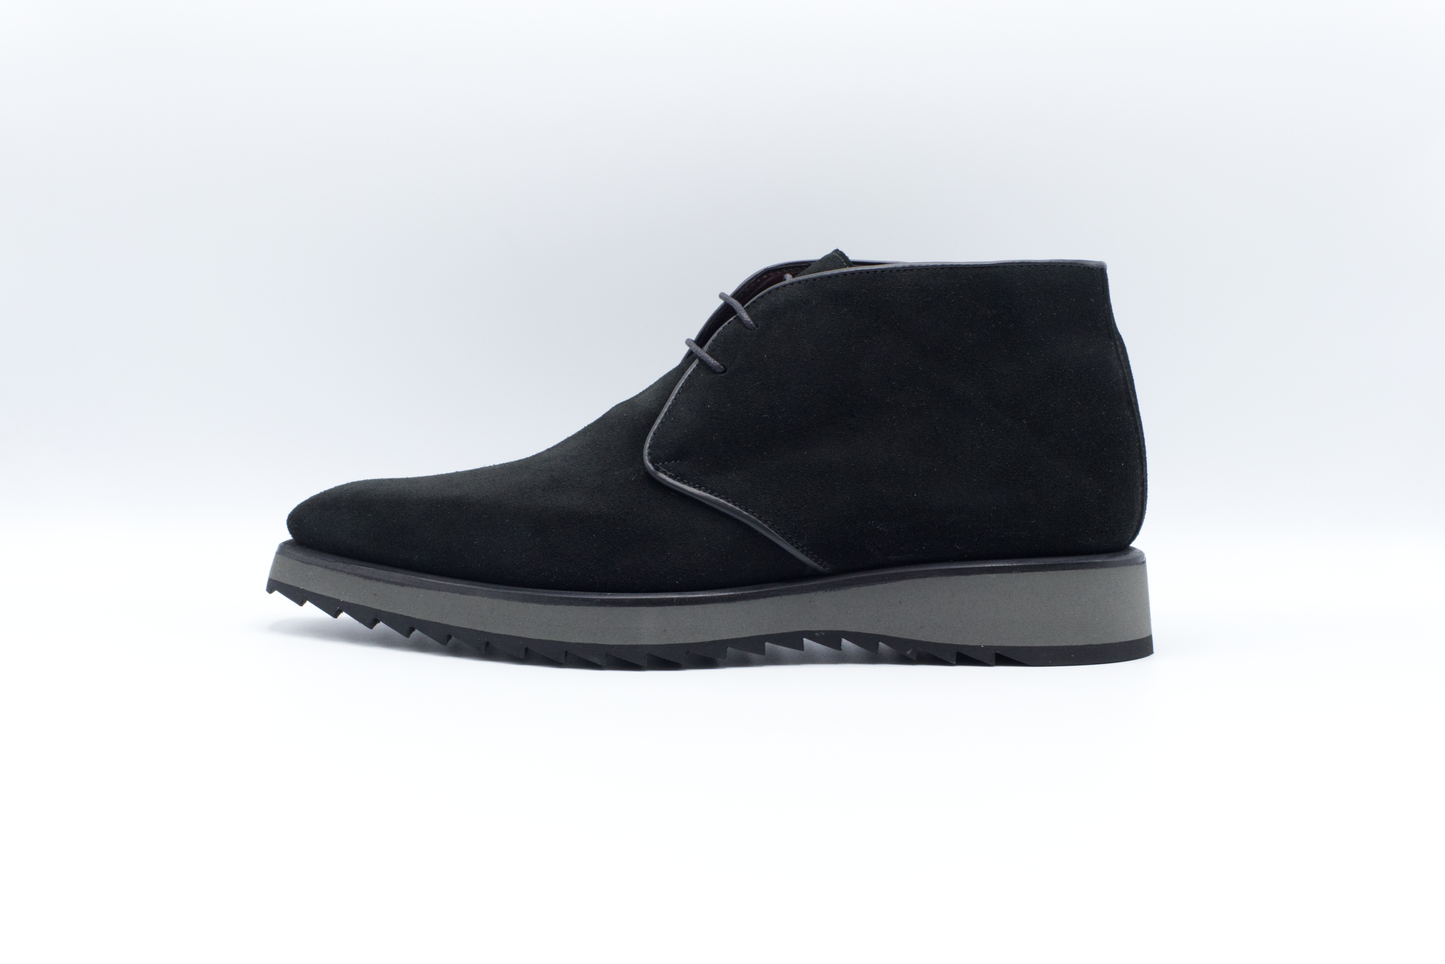 Shop Handmade Italian Men's Suede Chukka Boot in Black or browse our range of hand-made Italian sneakers for men in leather or suede. We deliver to the USA and Canada & offer multiple payment plans as well as accept multiple safe & secure payment methods. \With exceptional quality and comfort, our boots are perfect for any occasion.  Duedi02